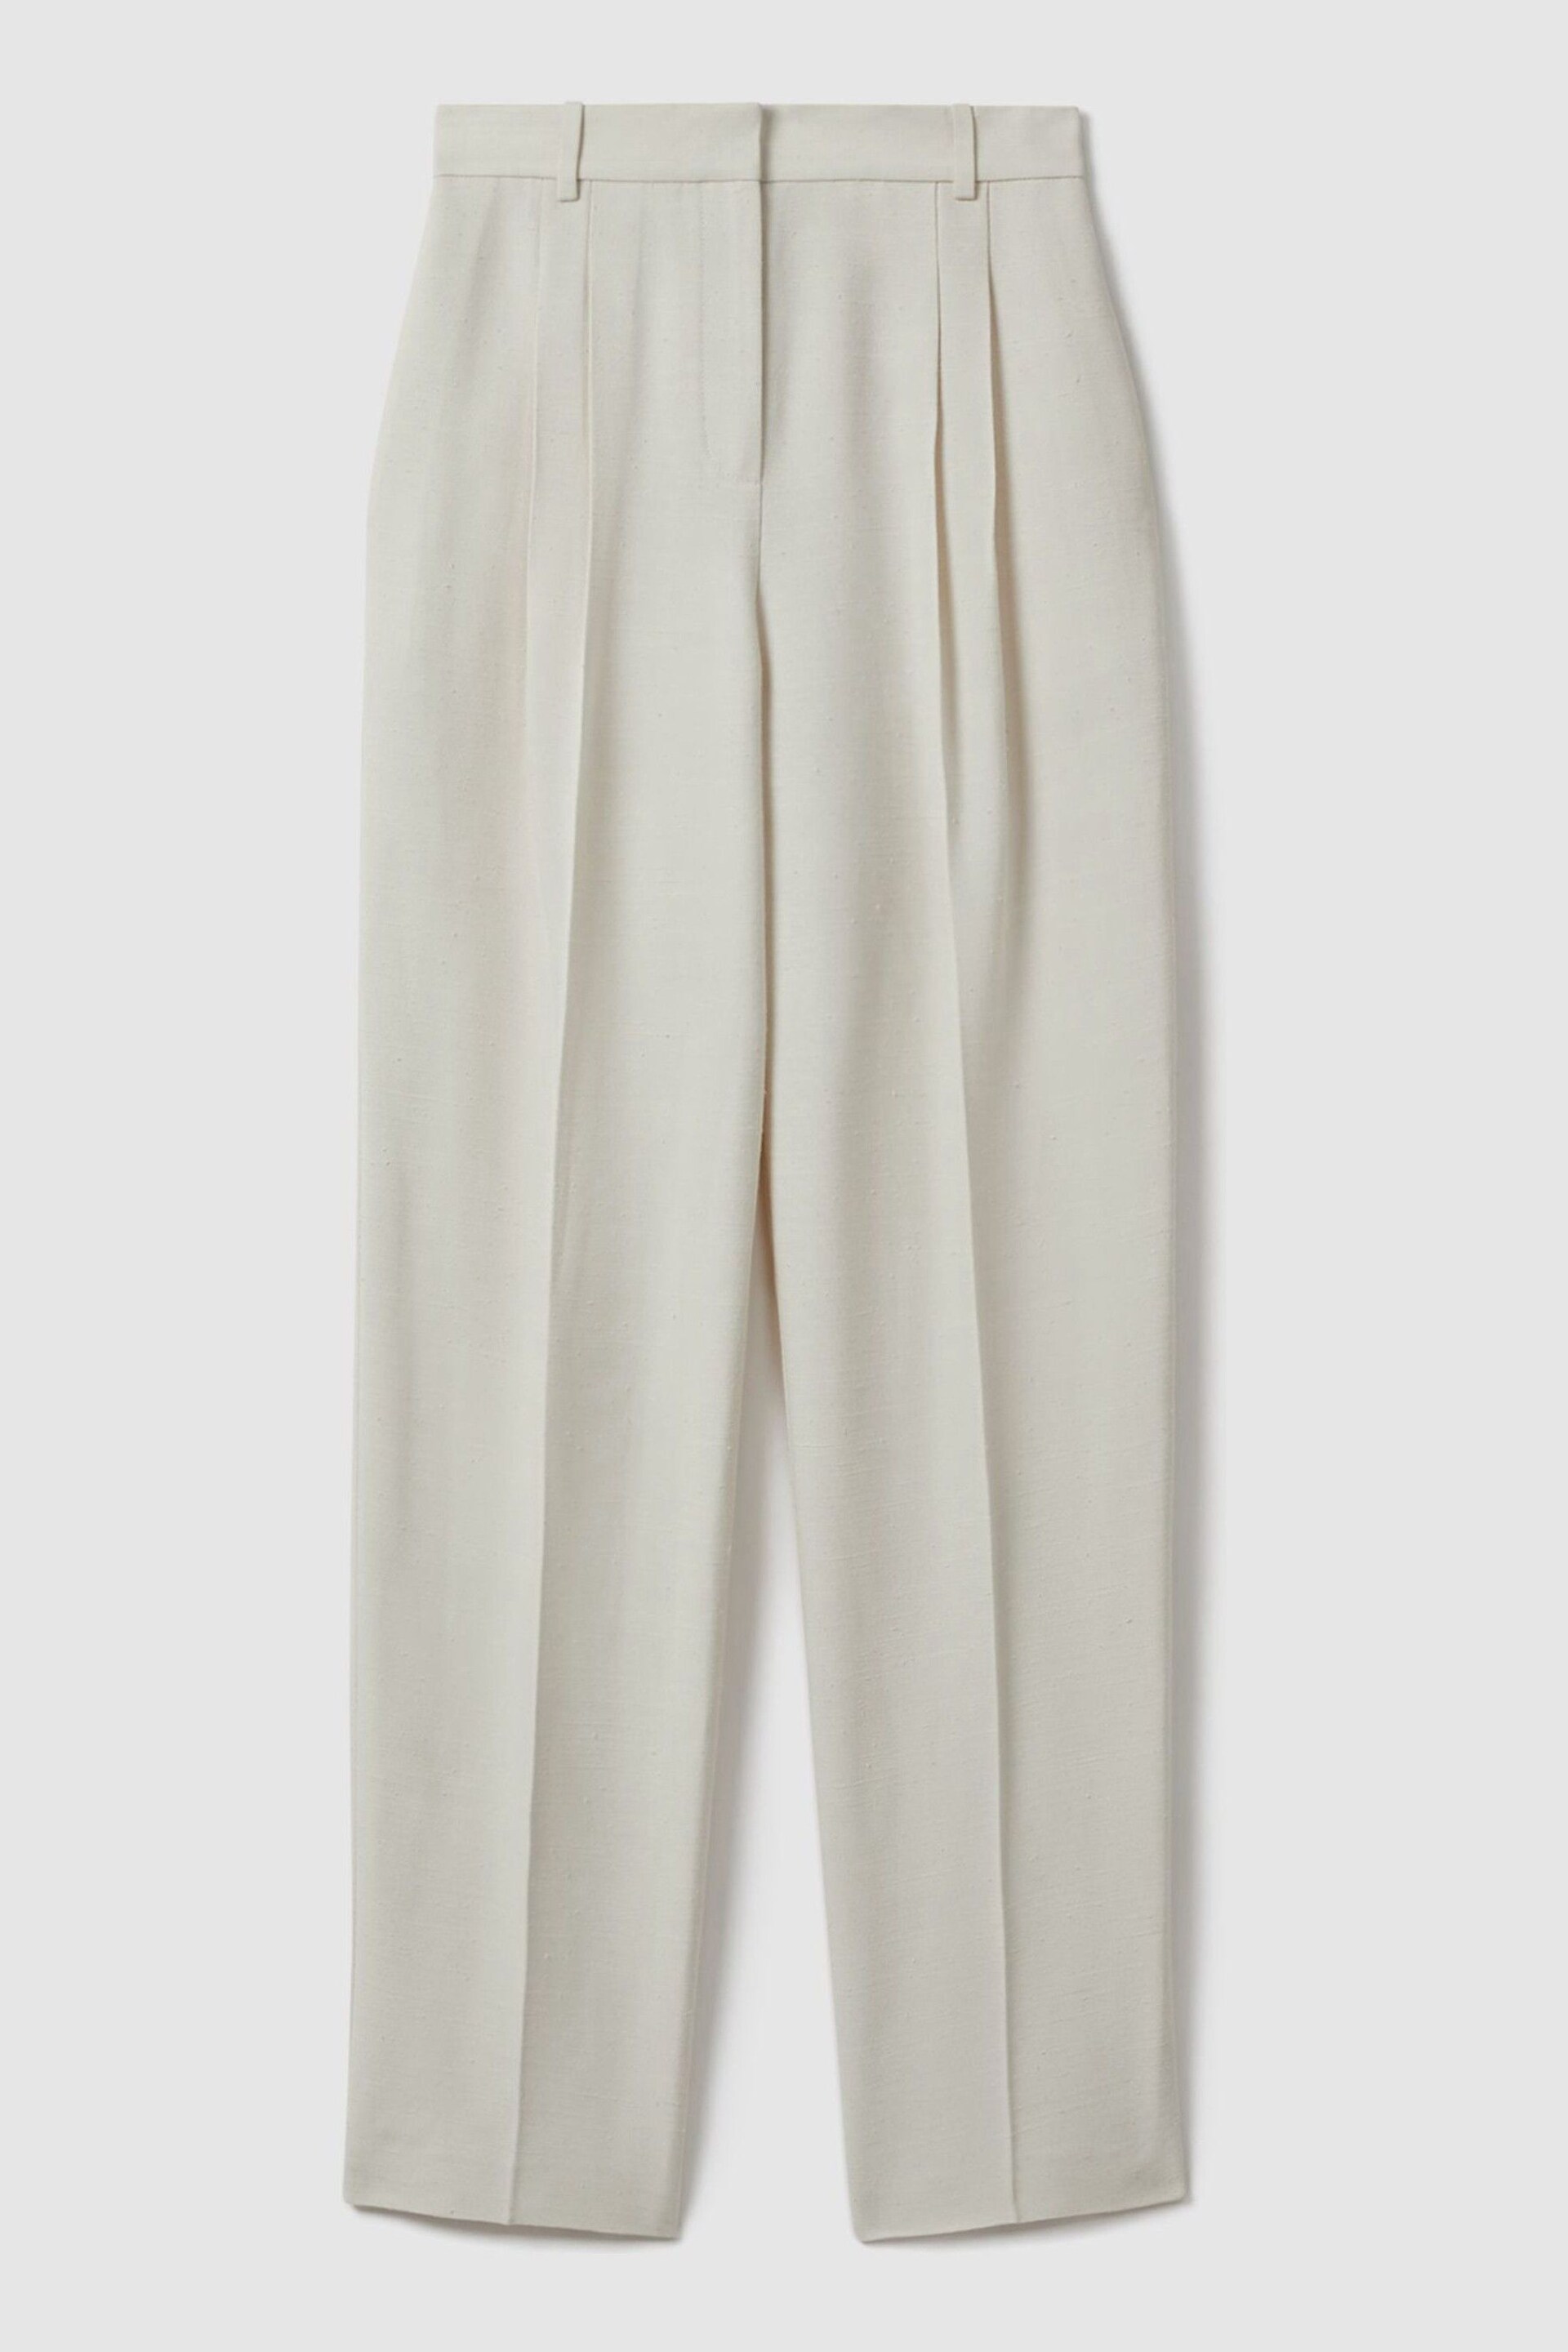 Atelier Italian Textured Tapered Suit: Trousers with Silk - Image 2 of 6